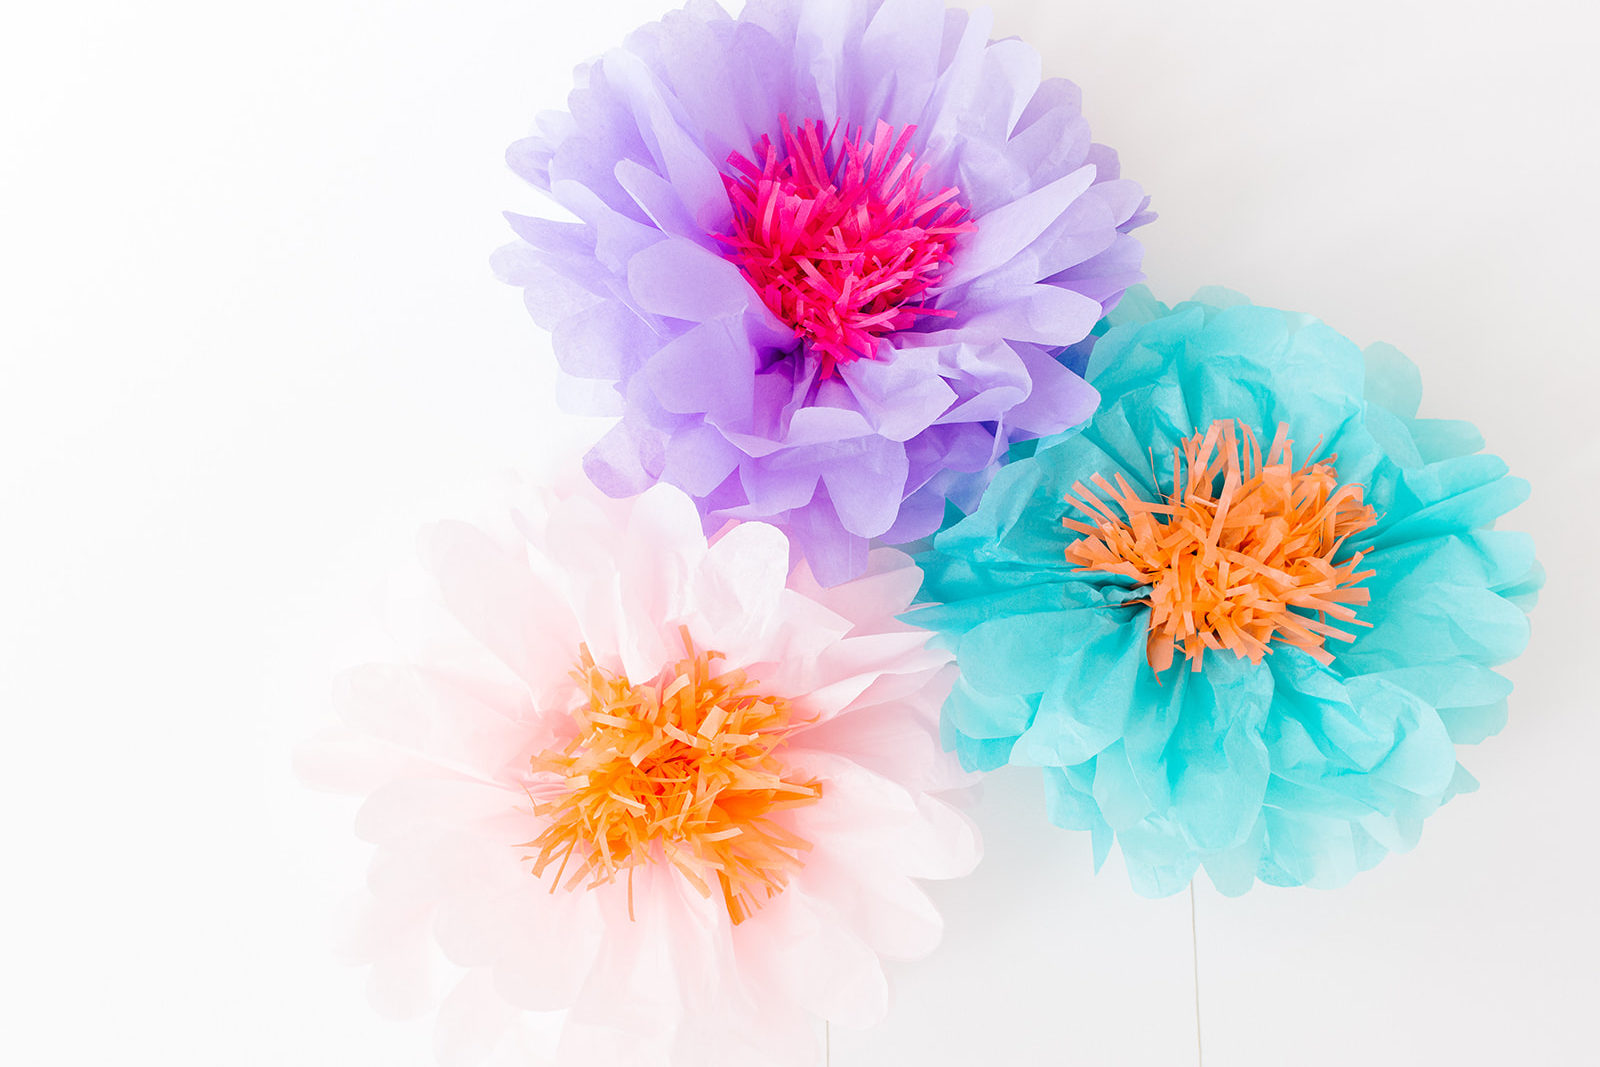 How to Make Tissue Paper Flowers